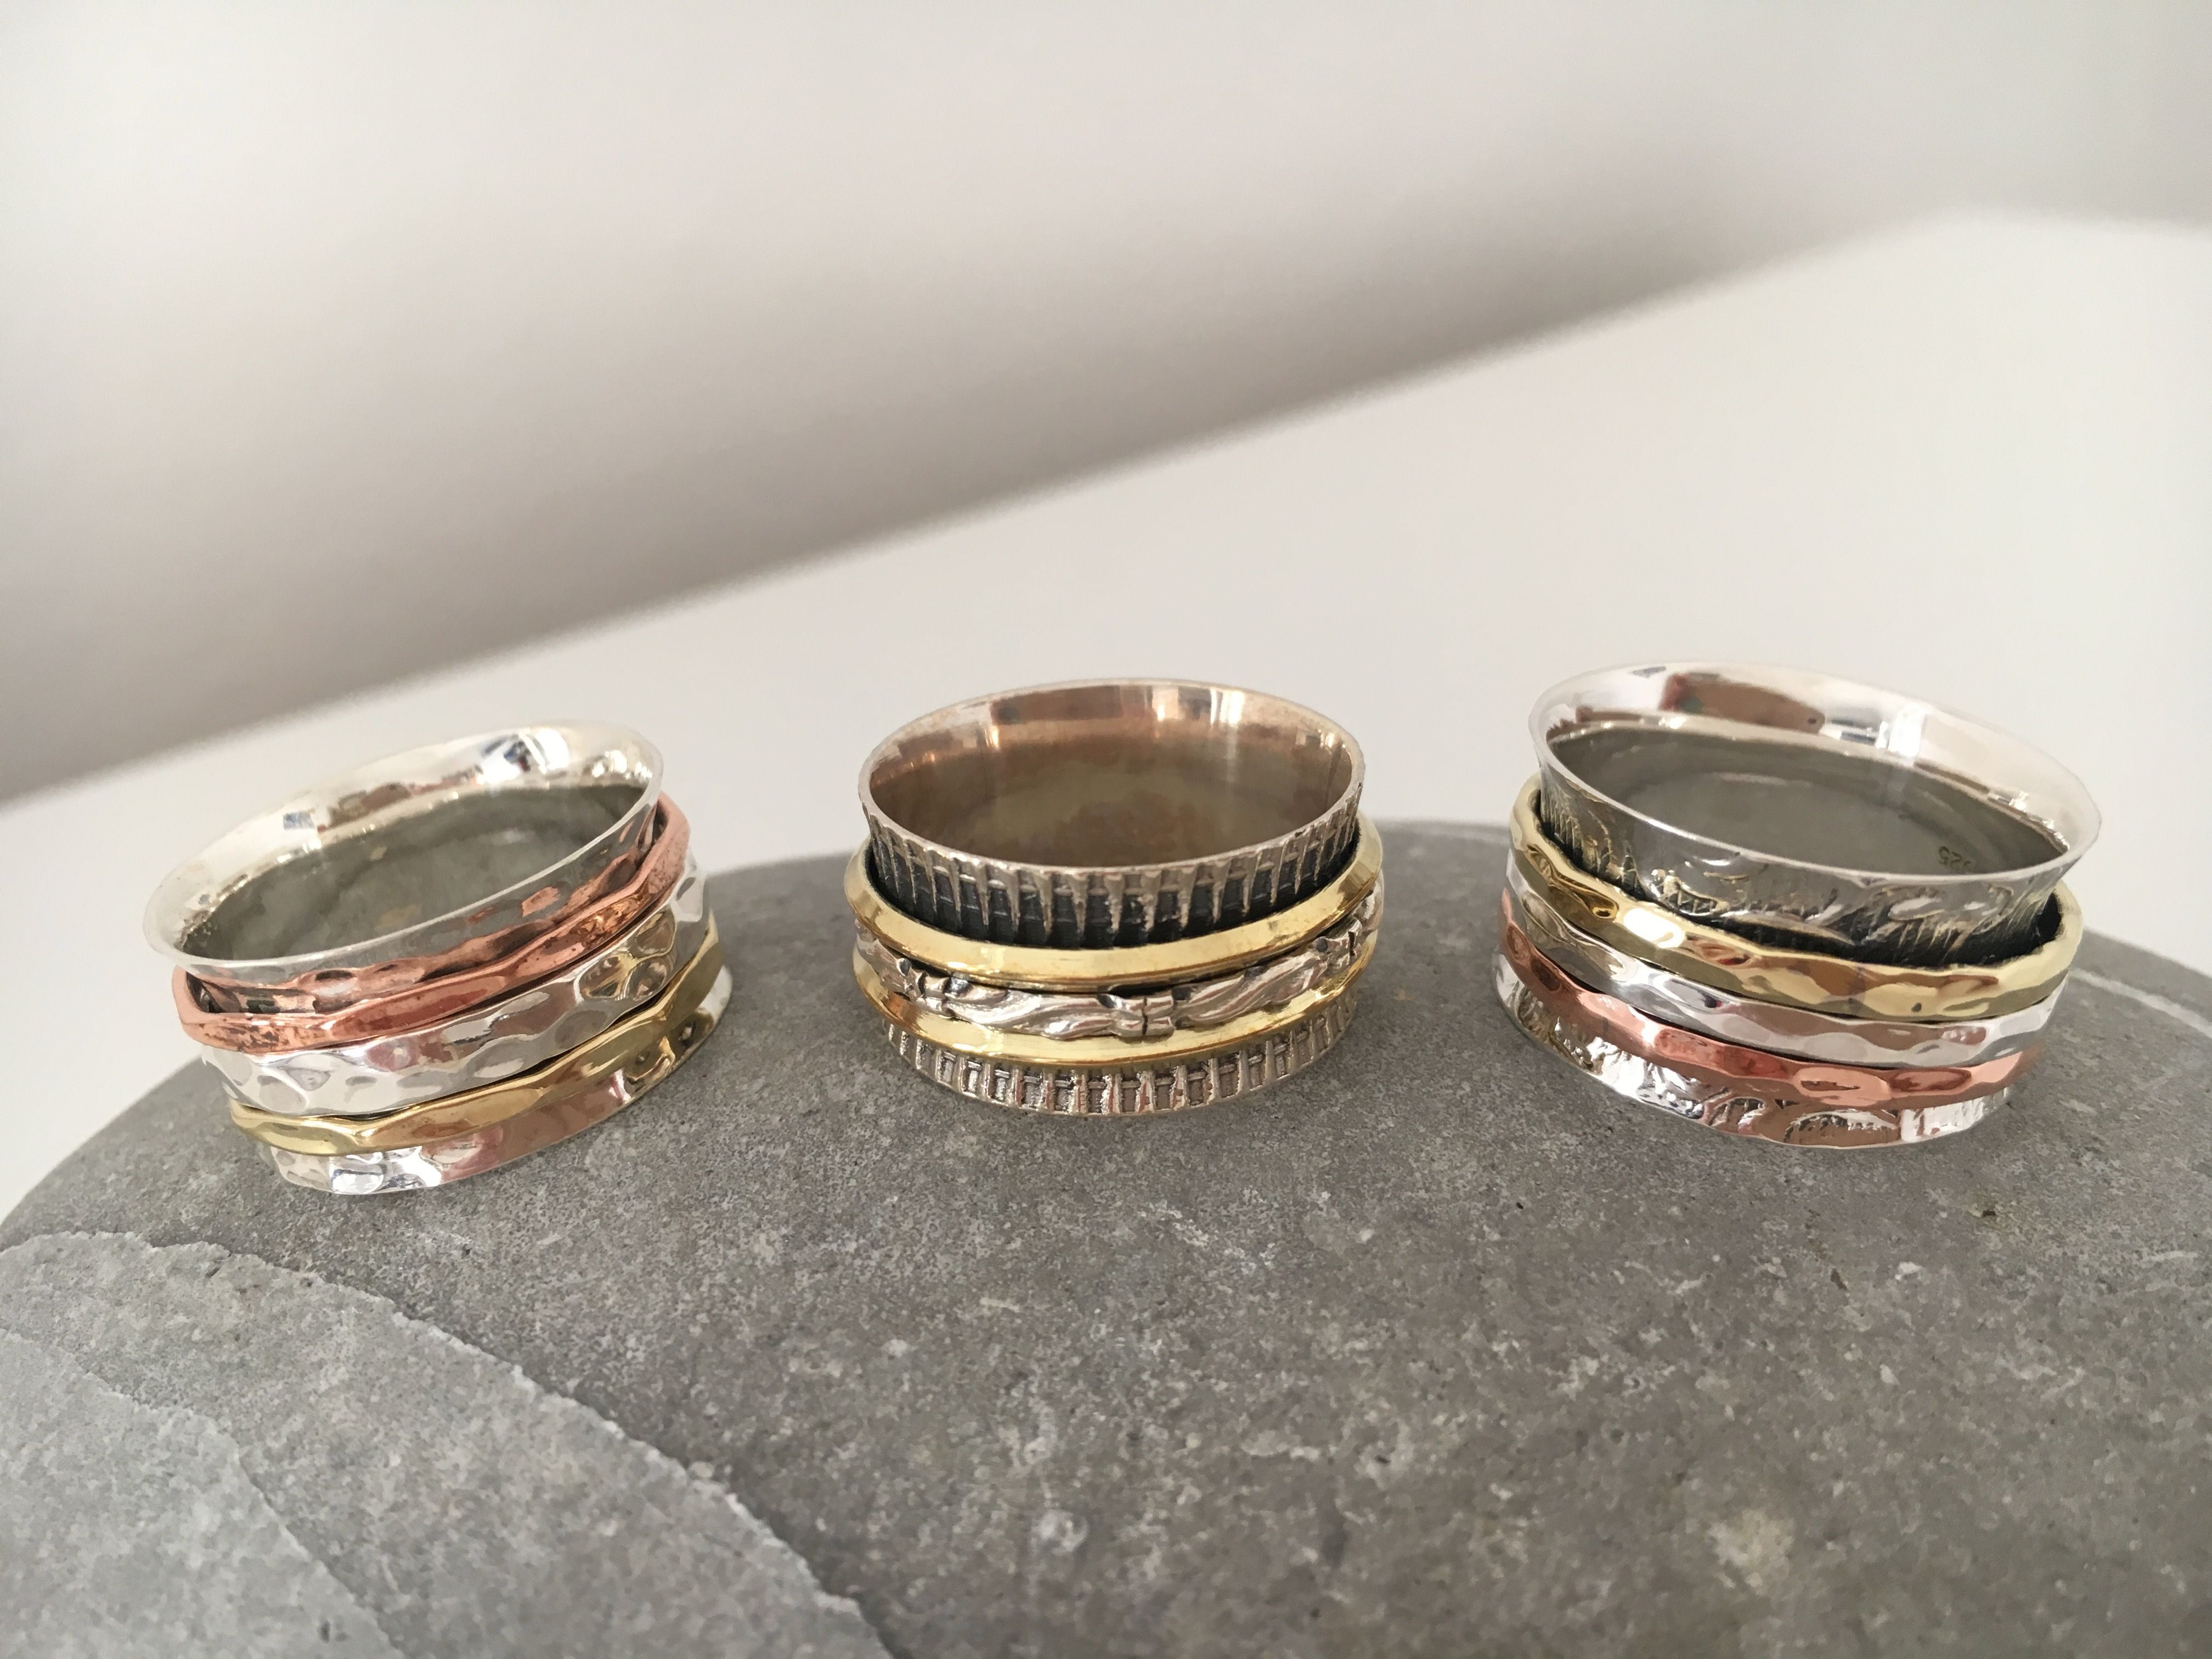 Spin Rings in Silver, Copper and Brass